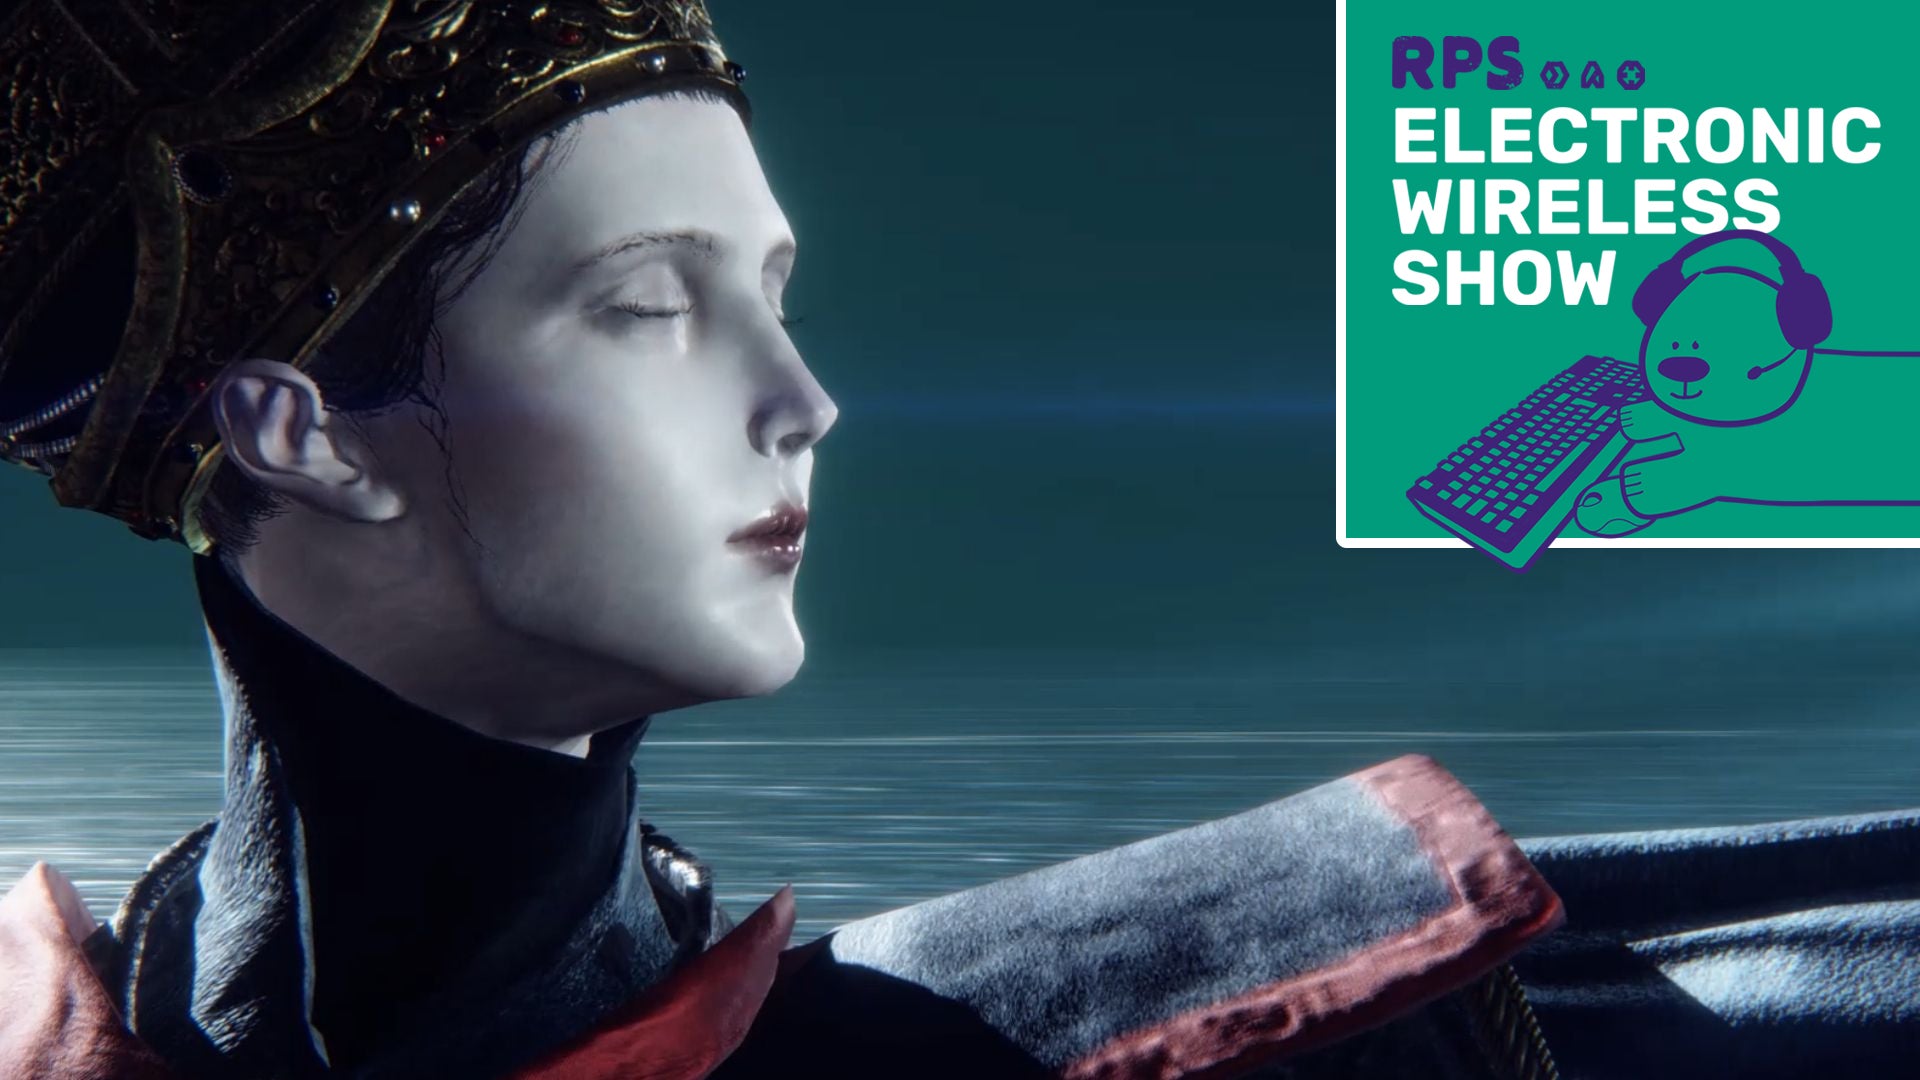 A close-up of Rennala, Queen of the Full Moon, a boss in Elden Ring, with the Electronic Wireless Show podcast logo in the top right corner